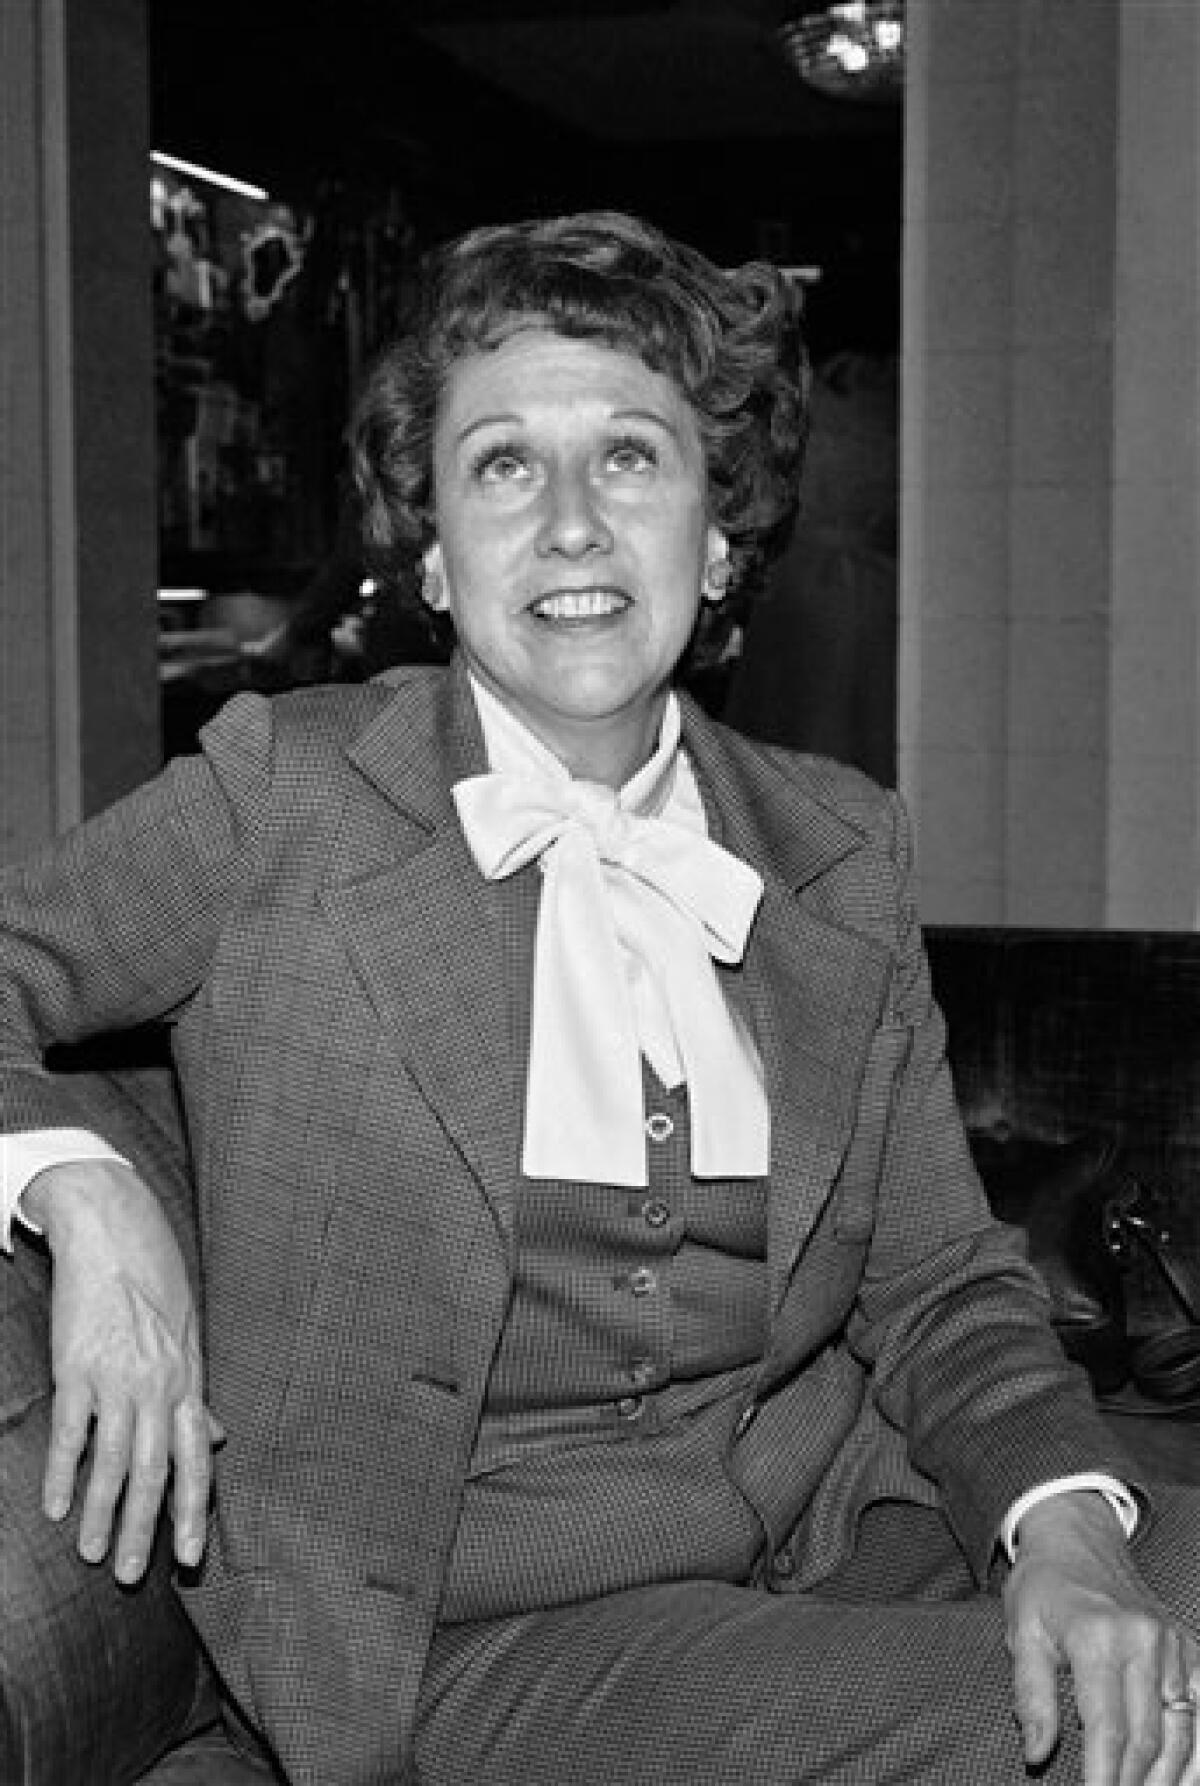 FILE - Actress Jean Stapleton speaks during an interview in Washington on Wednesday, March 3, 1977, saying she will increase speaking out to the "Edith Bunkers" of the land to try and muster support for the Equal Rights Amendment. Stapleton, who played Edith Bunker in the groundbreaking 1970s TV comedy "All in the Family," has died. She was 90. John Putch said Saturday, June 1, 2013 that his mother died Friday, May 31, 2013 of natural causes at her New York City home surrounded by friends and fa